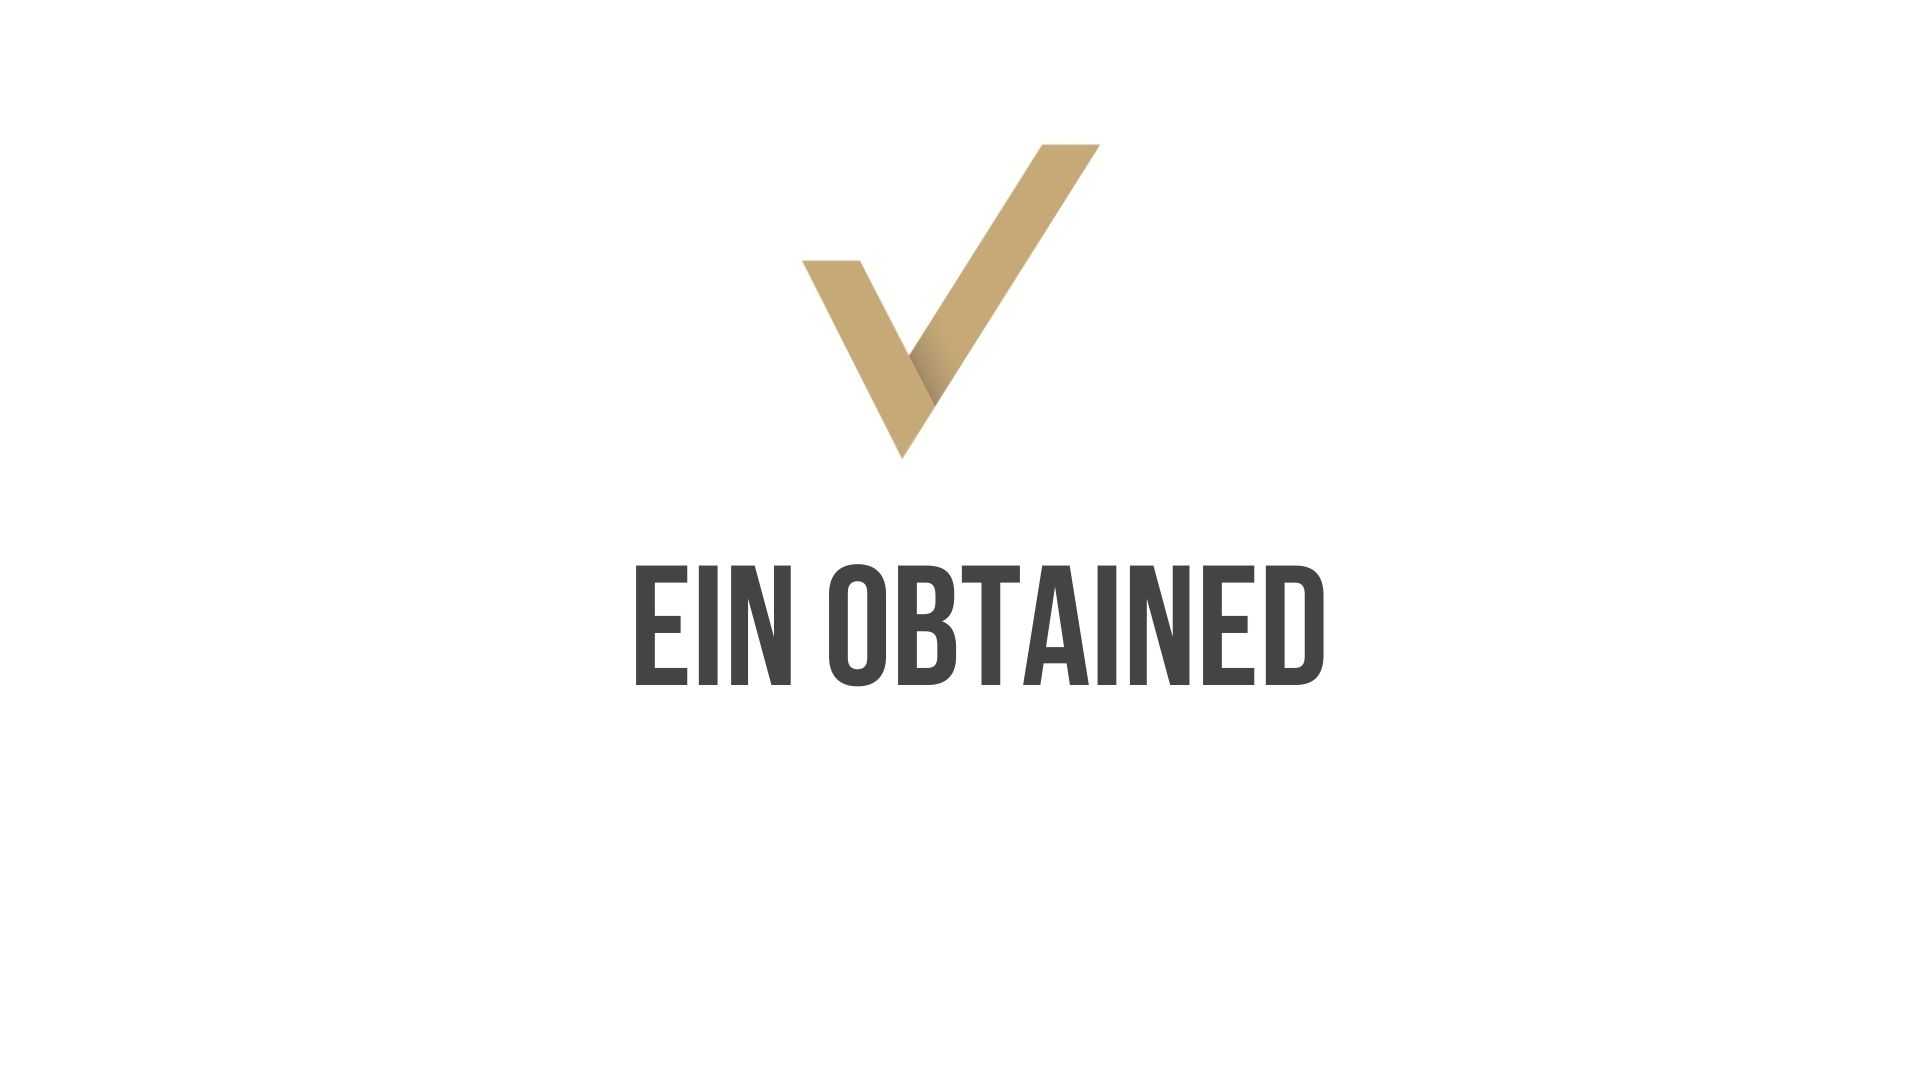 EIN Obtained for Foreign Holding